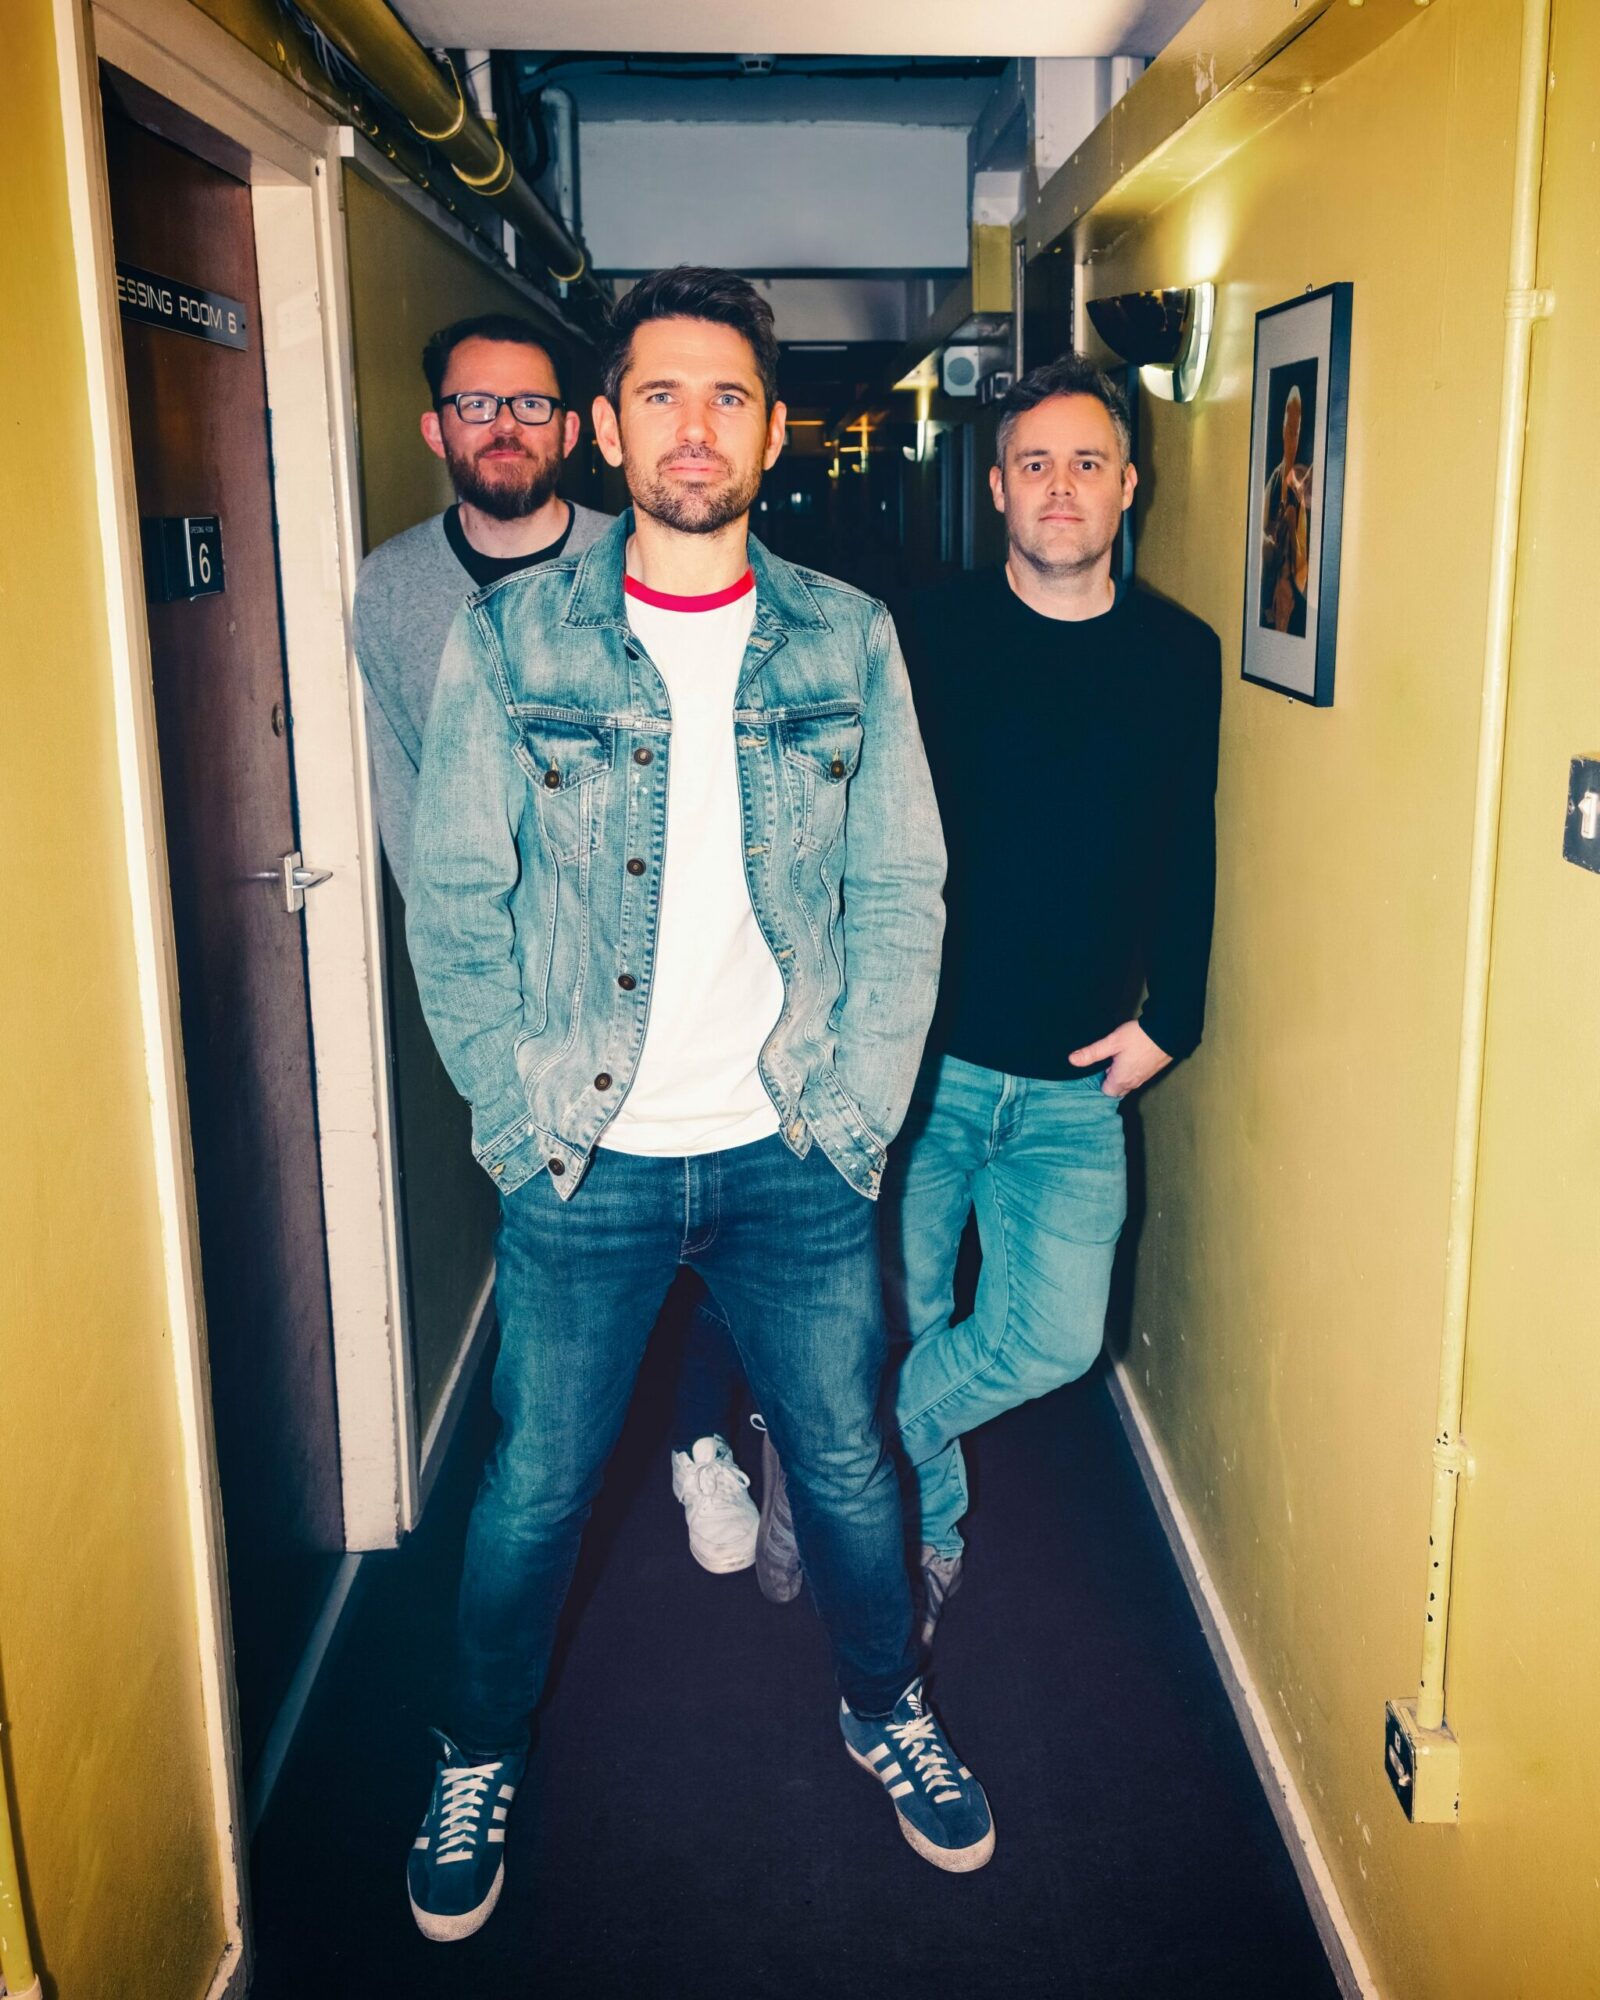 Scouting for Girls at Middlesbrough Town Hall, Middlesbrough